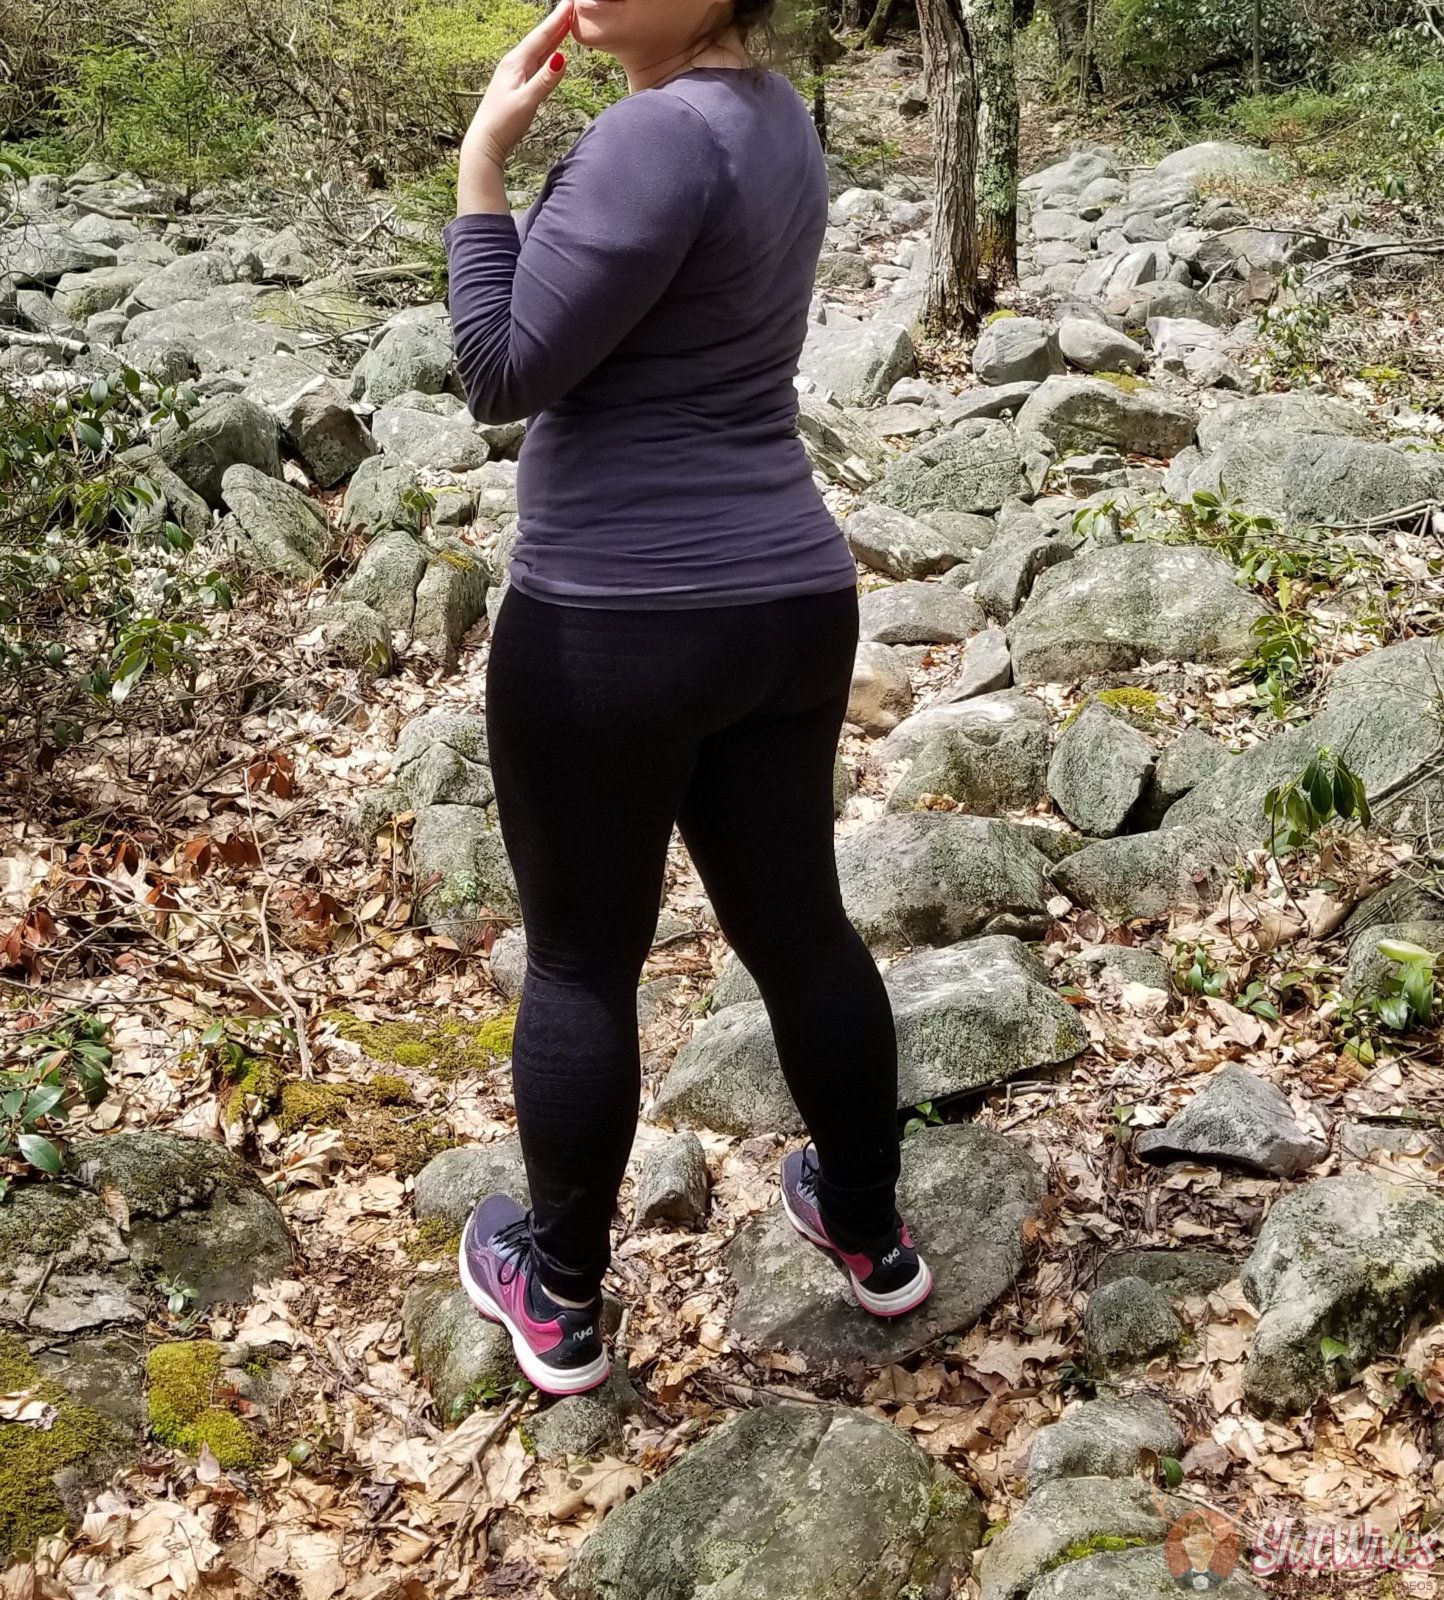 Big Phat Round Ass Outdoor Hike 1